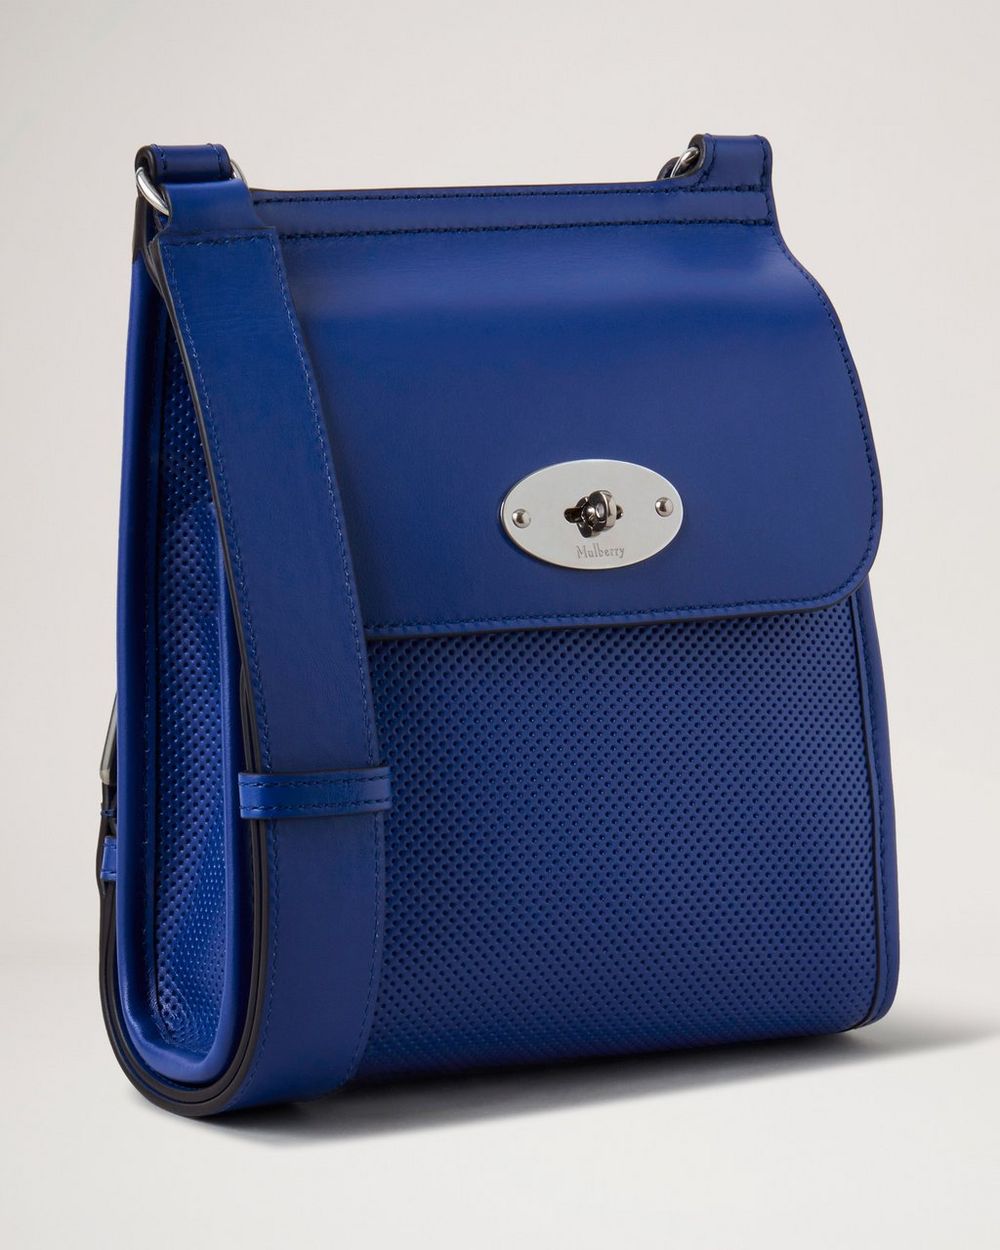 Mulberry Small Antony Leather Messenger Bag - Blue